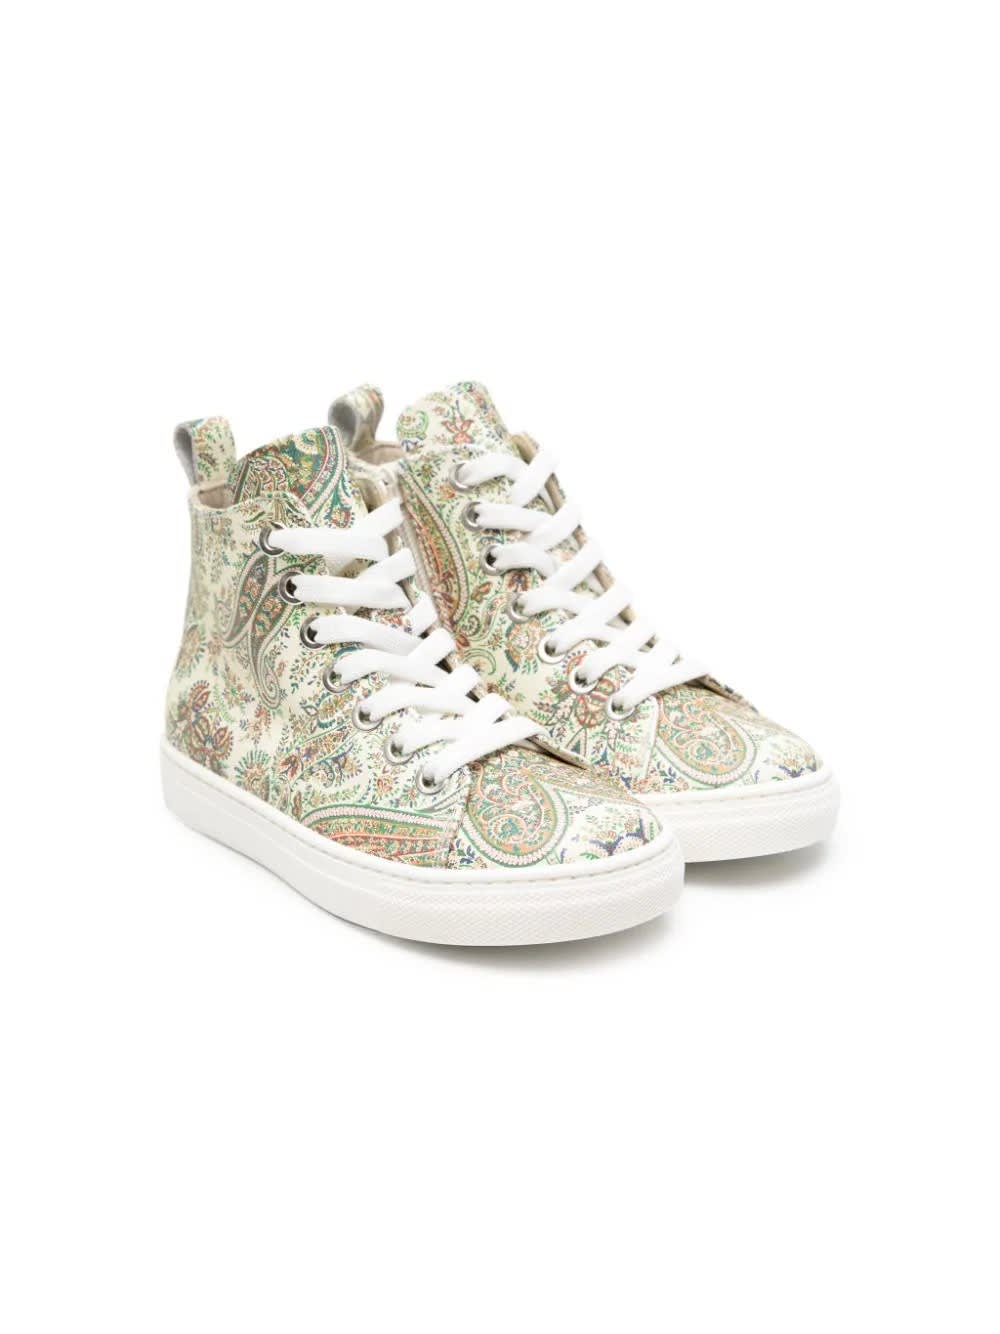 Etro High Sneakers With Multicolored Paisley Motif